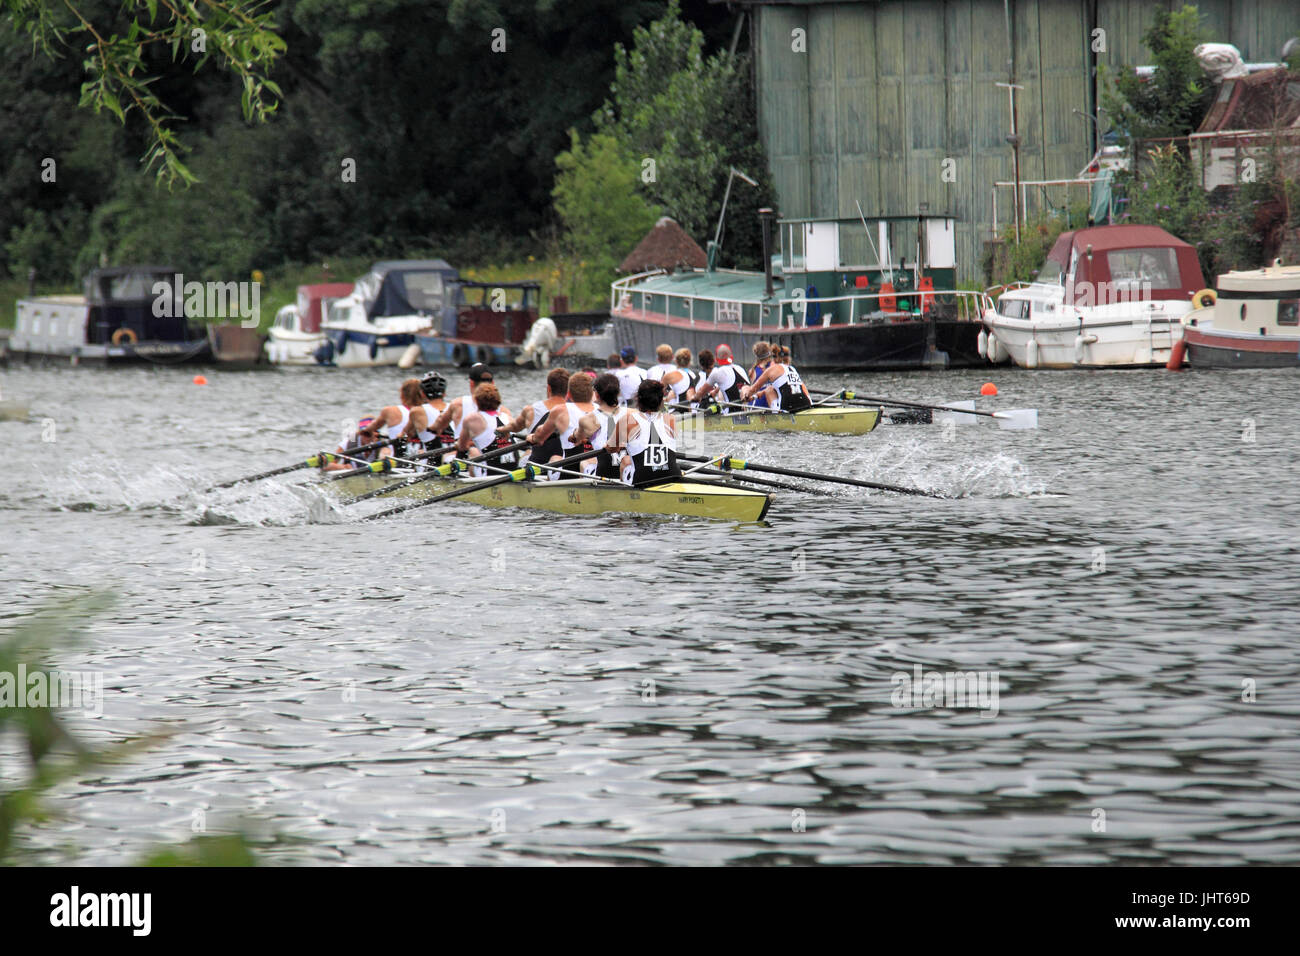 Molesey Boat Club (Winners, nearest) lead a second Molesey Boat Club eight. Mixed Elite Eight FINAL. 150th Molesey Amateur Regatta, 15th July 2017, River Thames, Hurst Park Riverside, East Molesey, near Hampton Court, Surrey, England, Great Britain, United Kingdom, UK, Europe. Annual amateur rowing competition and social event established in 1867. Credit:  Ian Bottle/Alamy Live News Stock Photo